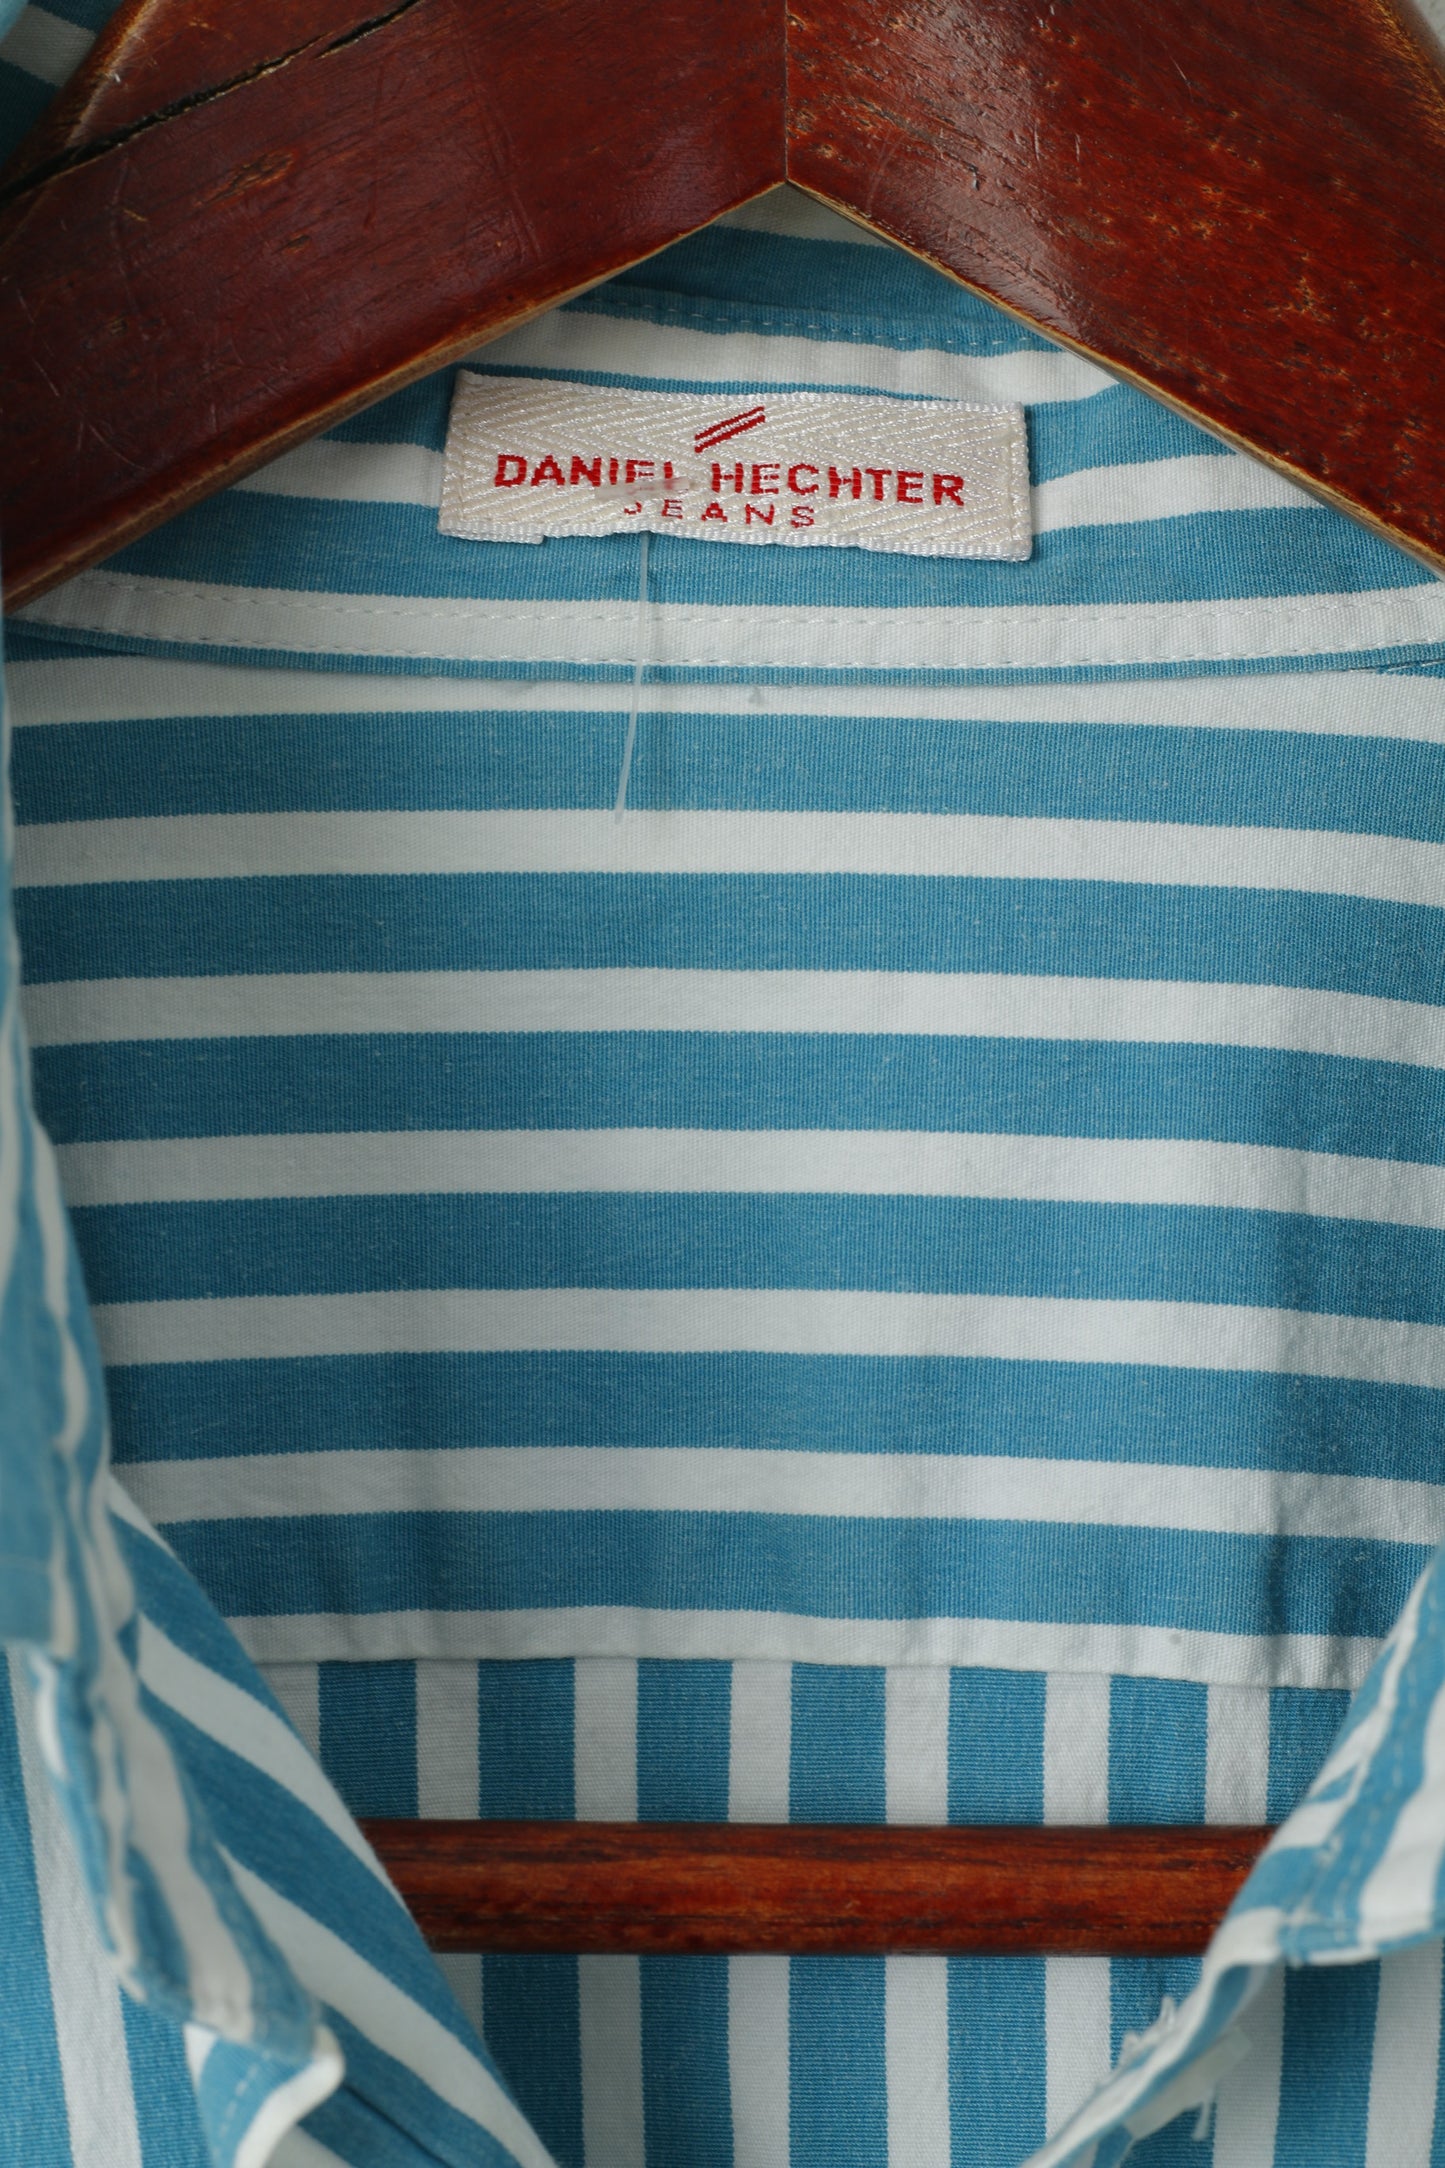 Daniel Hechter Jeans Women 16 M Casual Shirt Turquoise Striped Long Sleeve Cotton Top